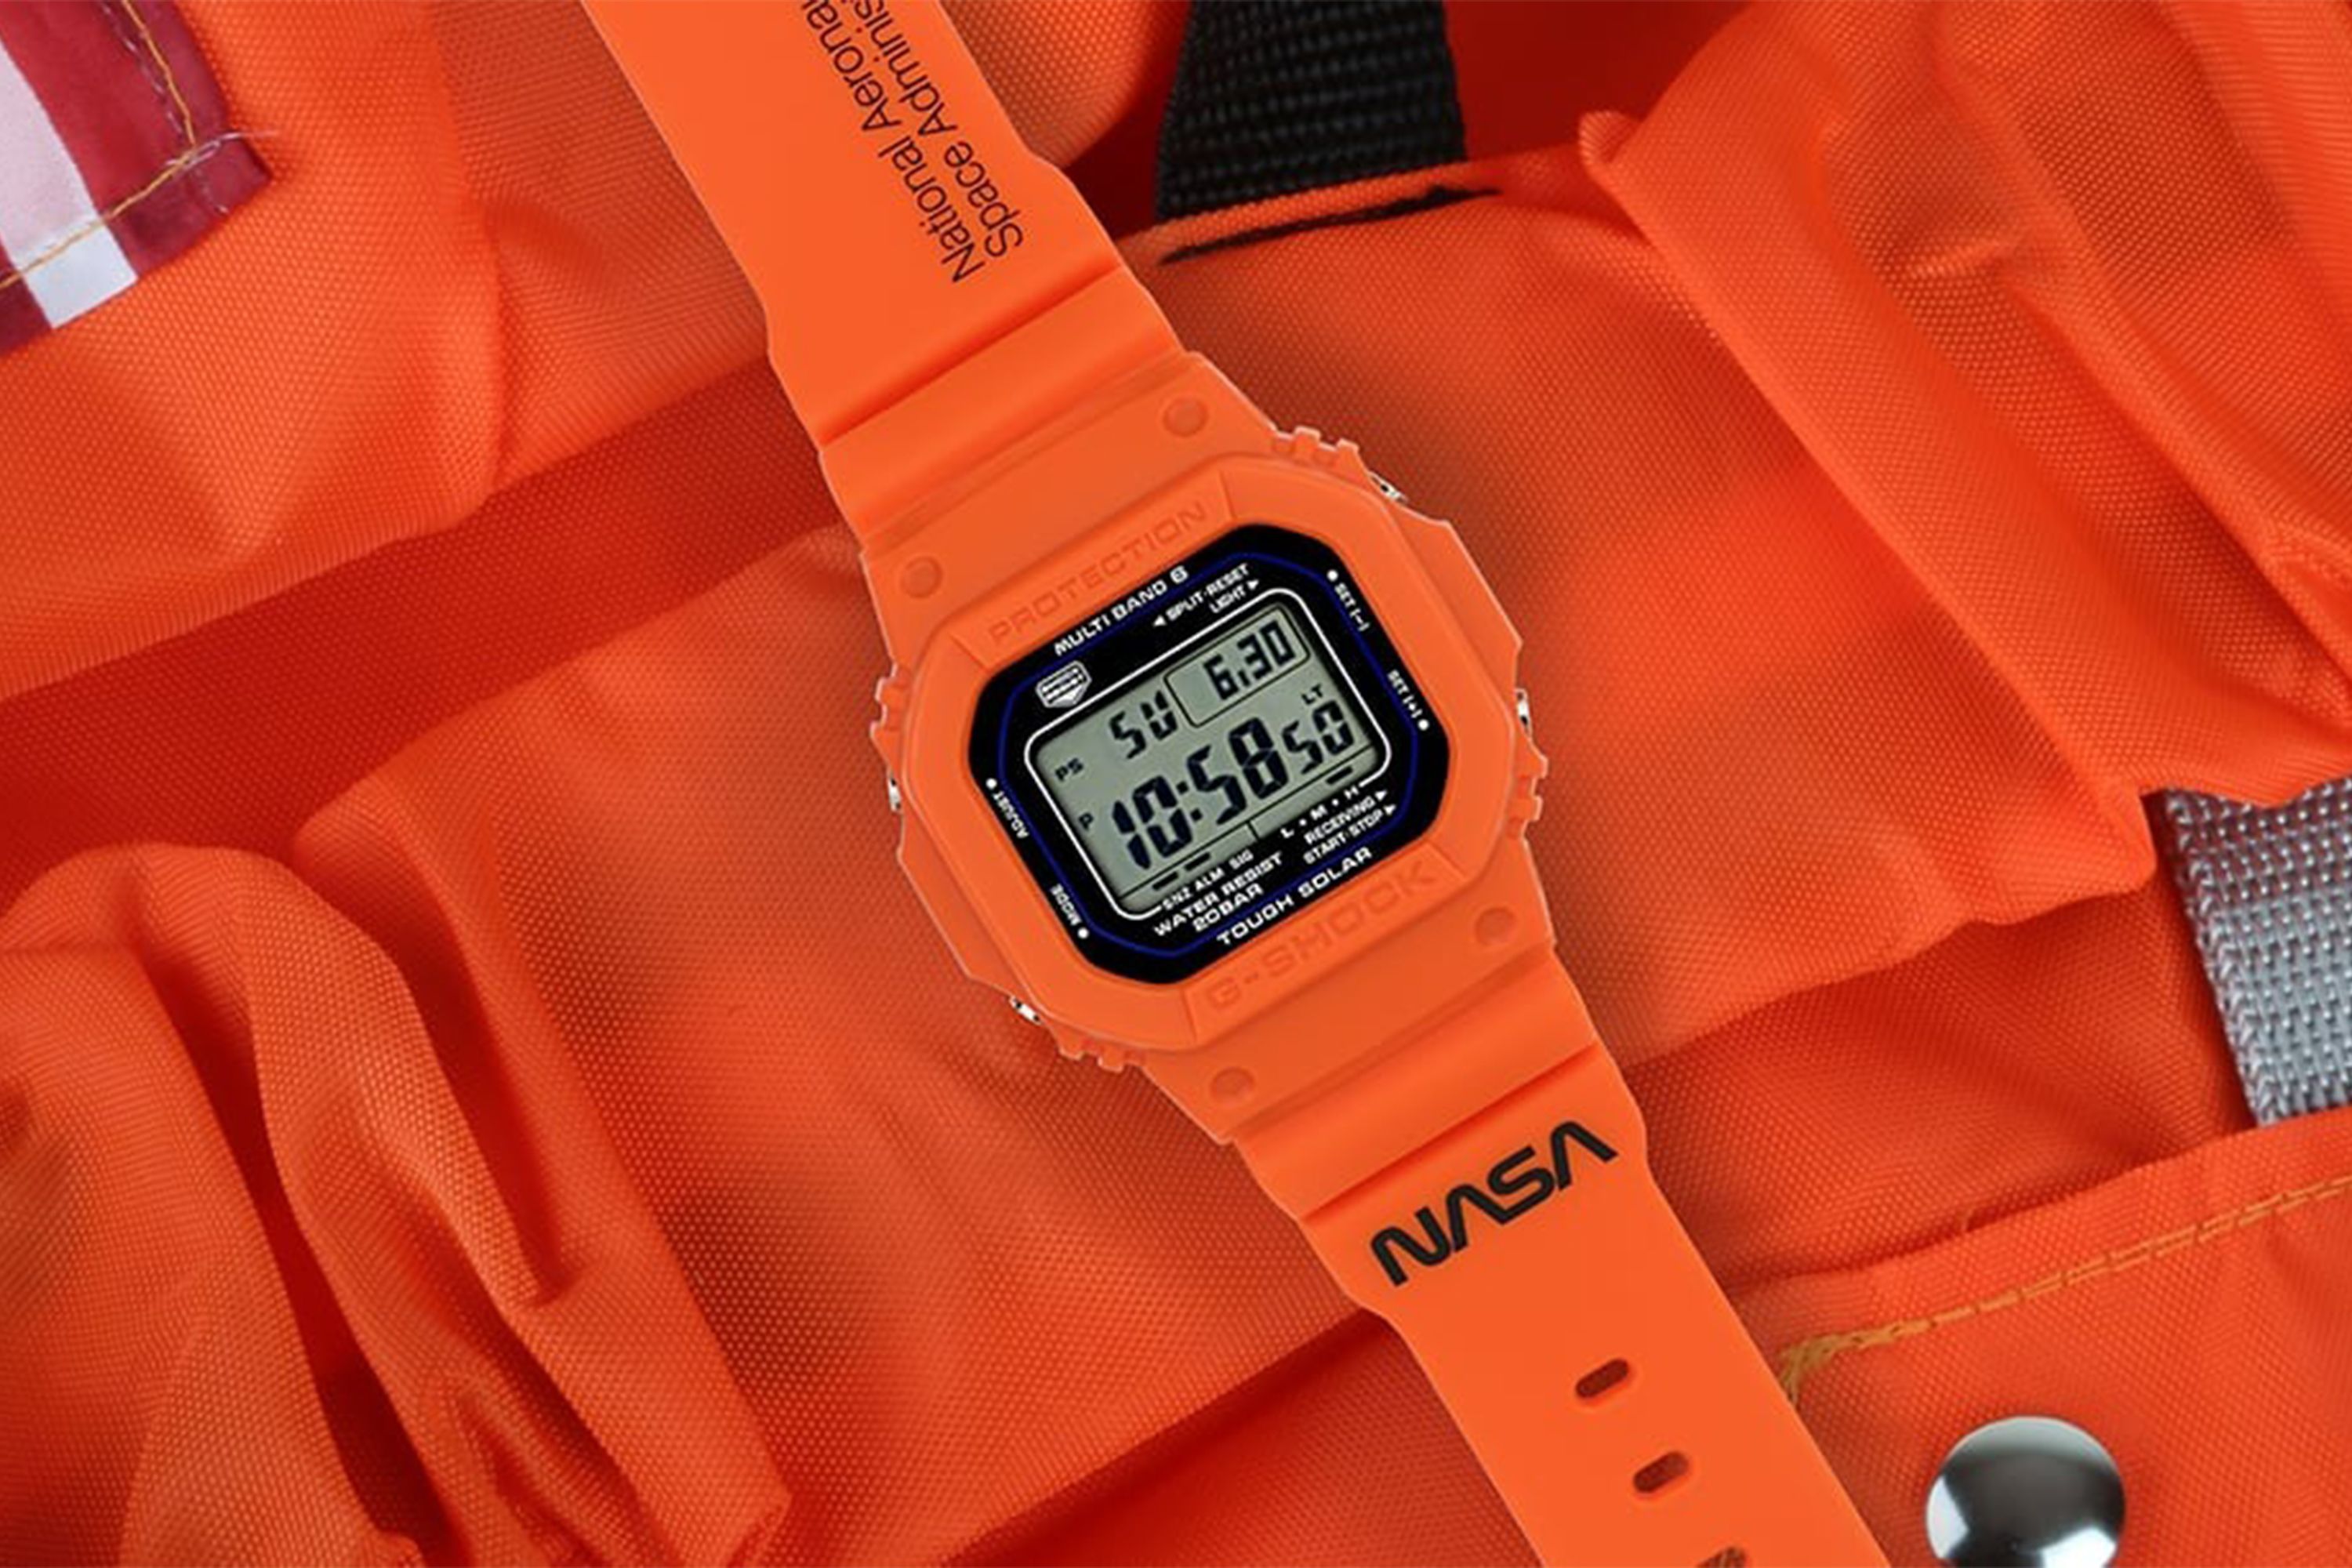 Over instelling Nog steeds Bekritiseren A Premium New G-Shock Is Made to Match NASA Flight Suits